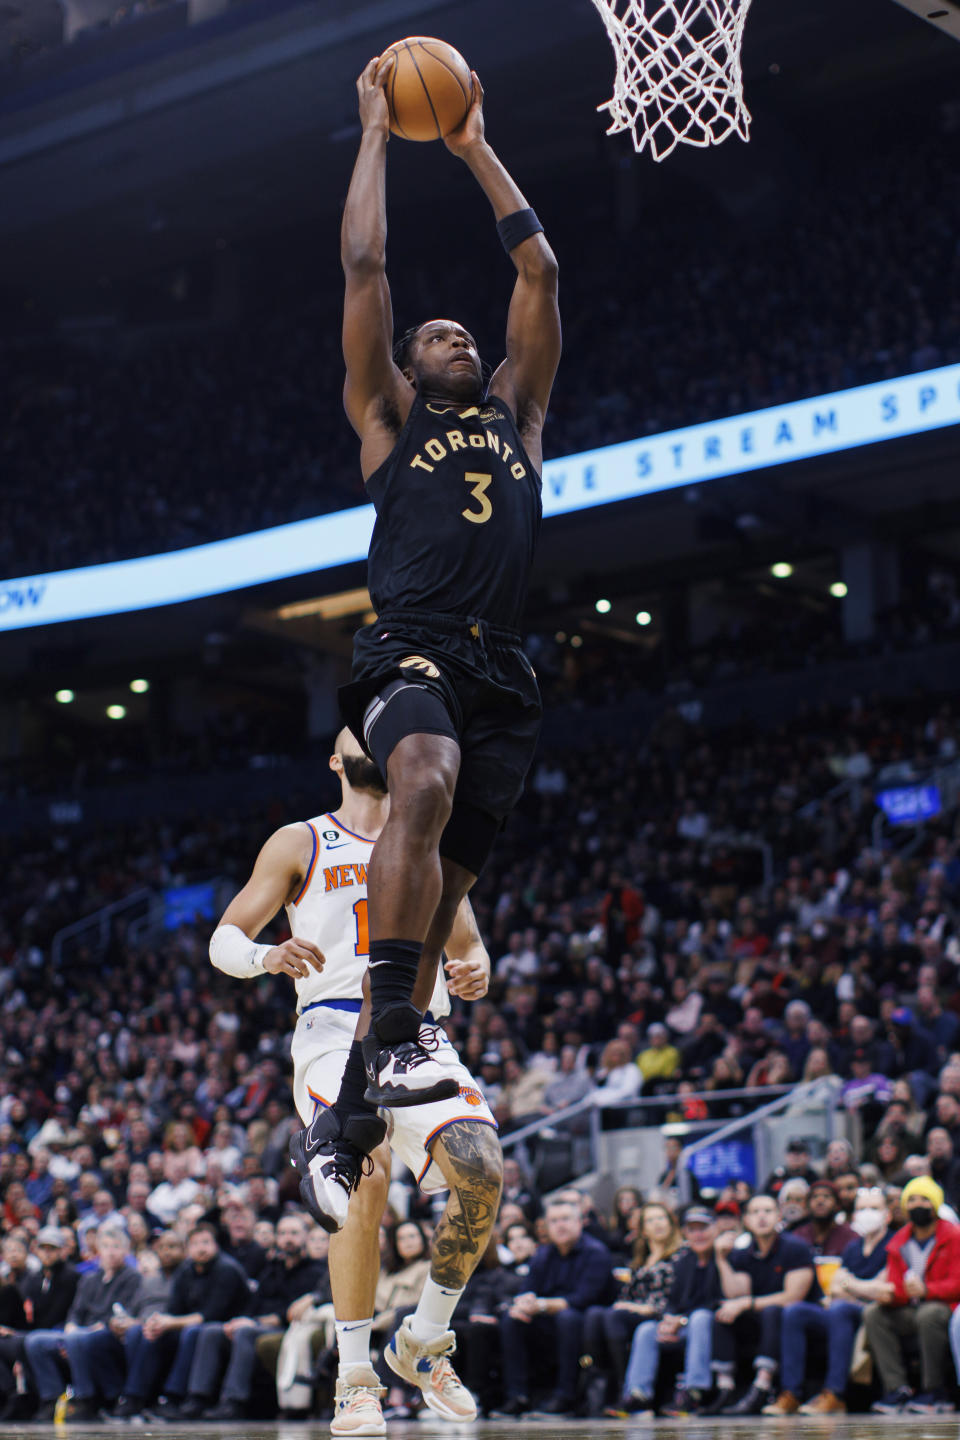 Toronto Raptors forward O.G. Anunoby (3) drives to the basket as New York Knicks guard Evan Fournier (13) looks on during the first half of an NBA basketball game Friday, Jan. 6, 2023, in Toronto. (Cole Burston/The Canadian Press via AP)